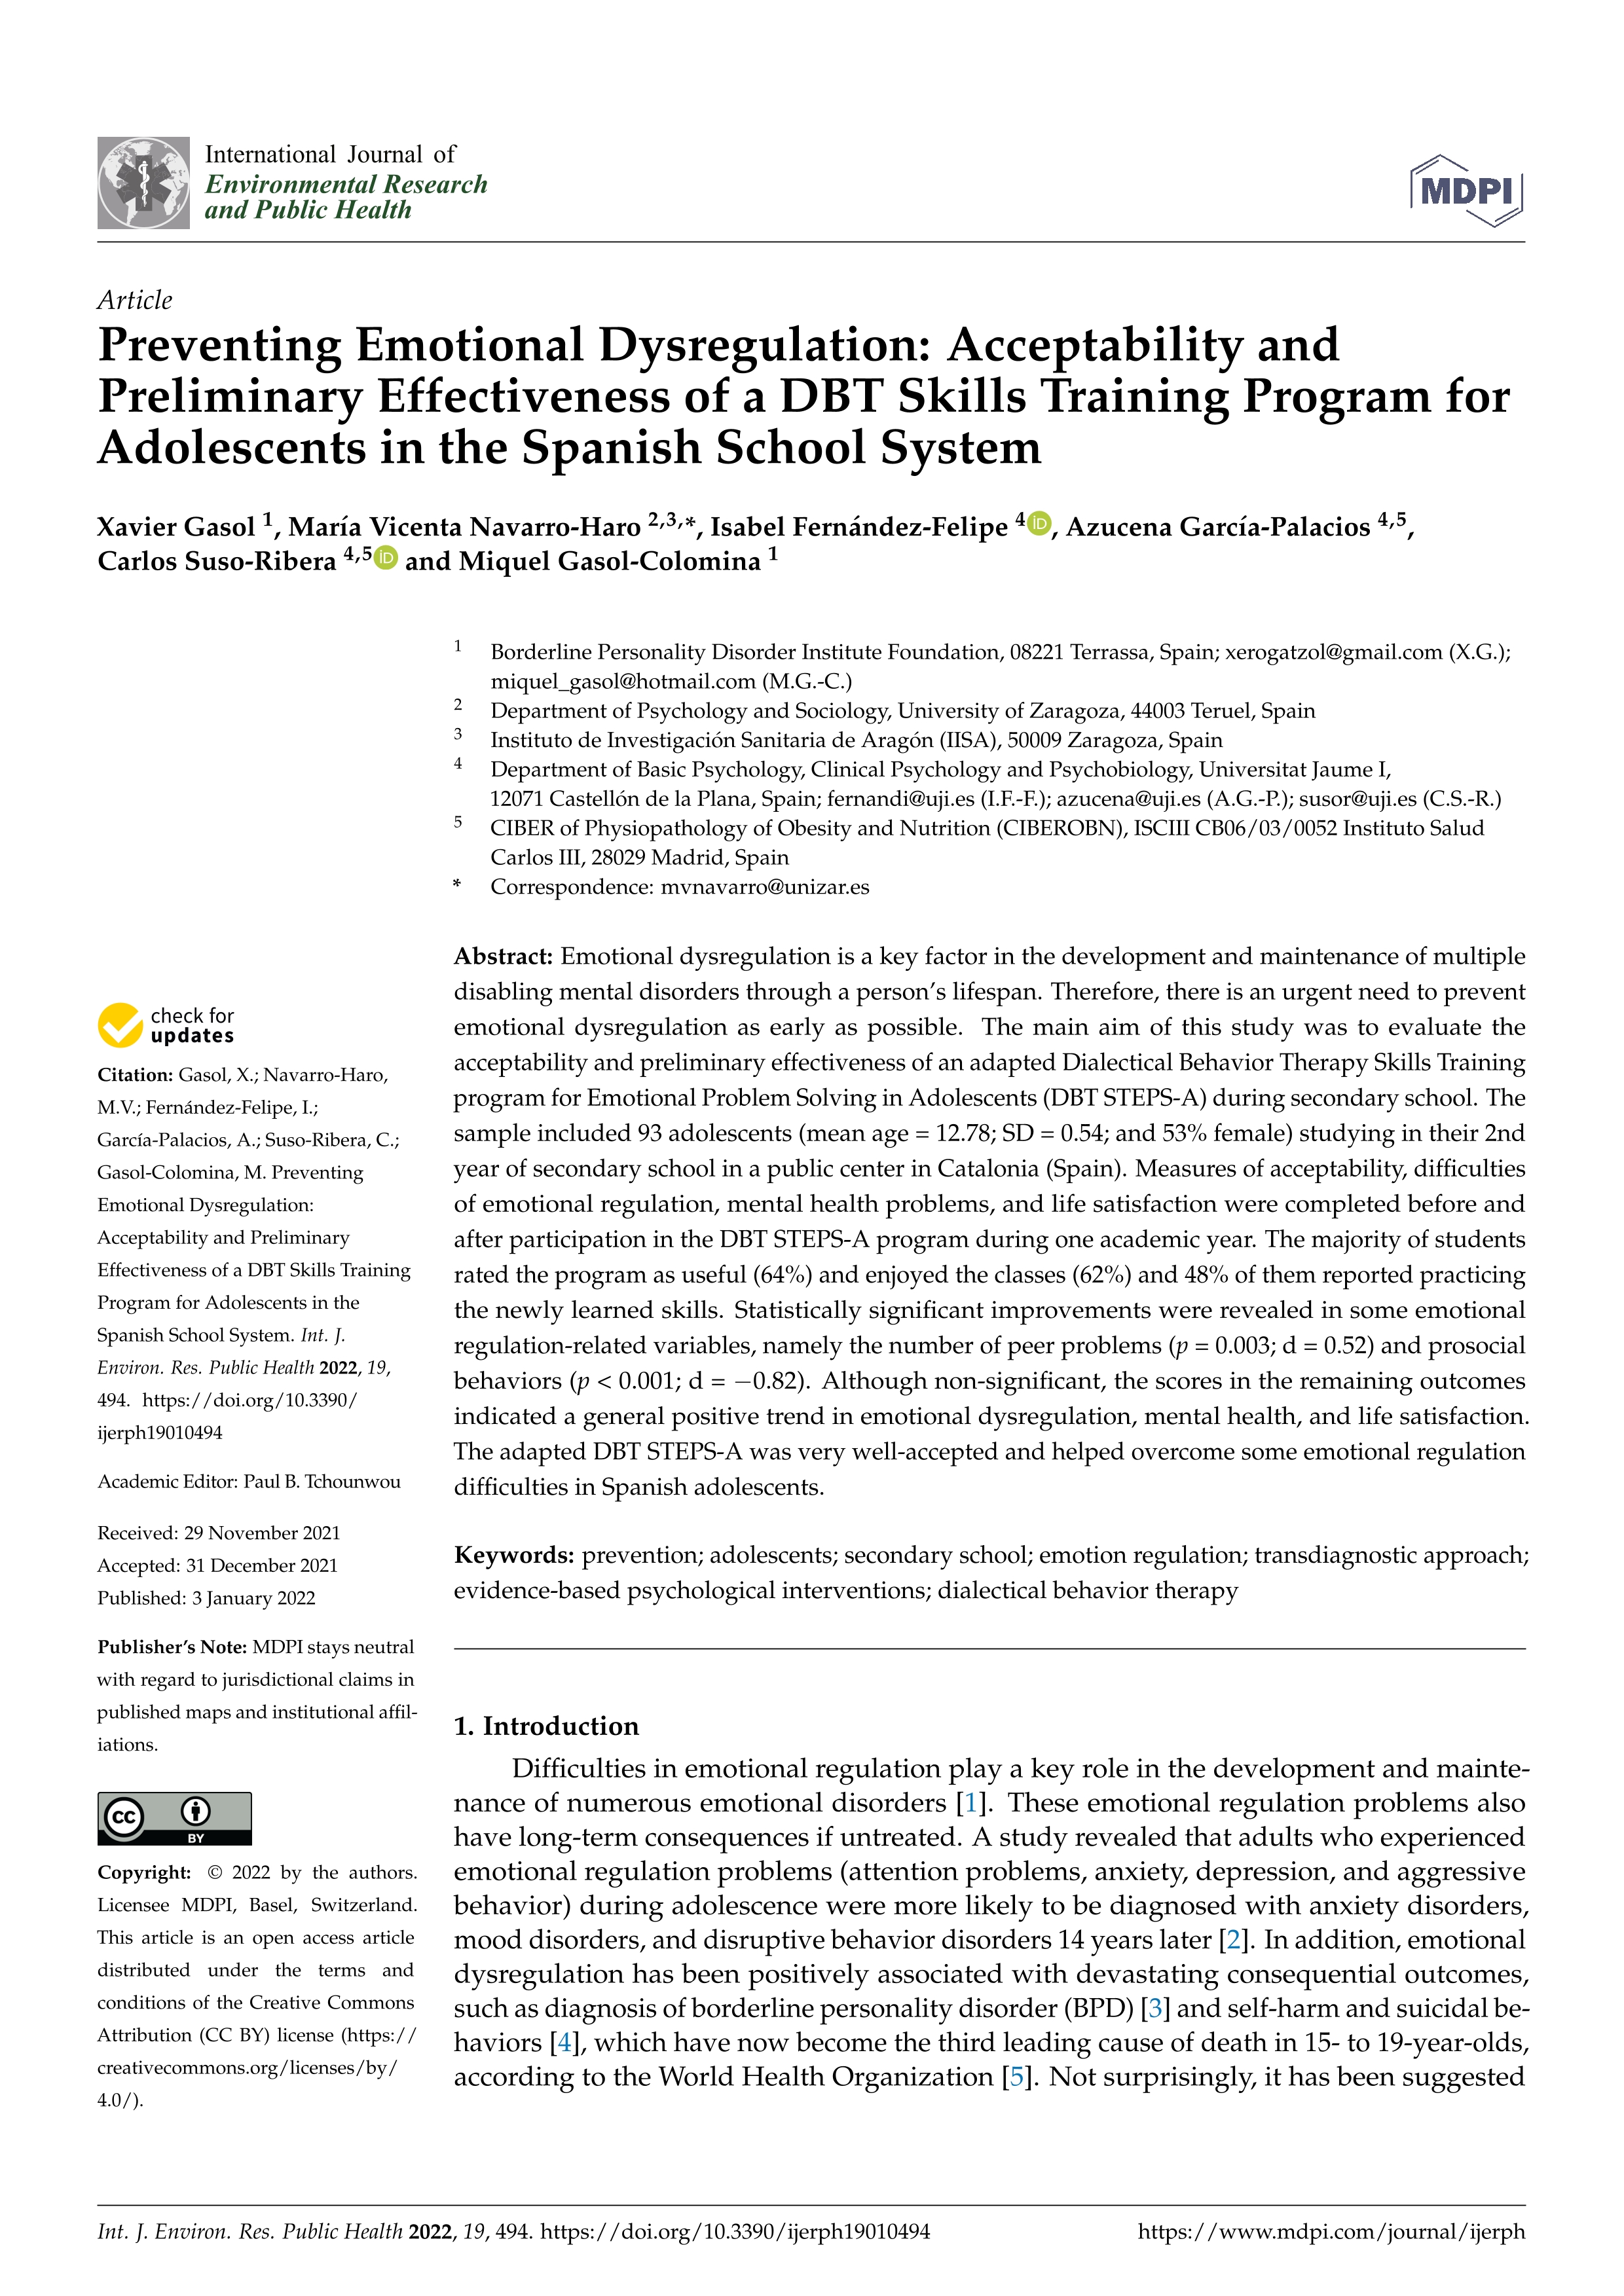 Preventing Emotional Dysregulation: Acceptability and Preliminary Effectiveness of a DBT Skills Training Program for Adolescents in the Spanish School System